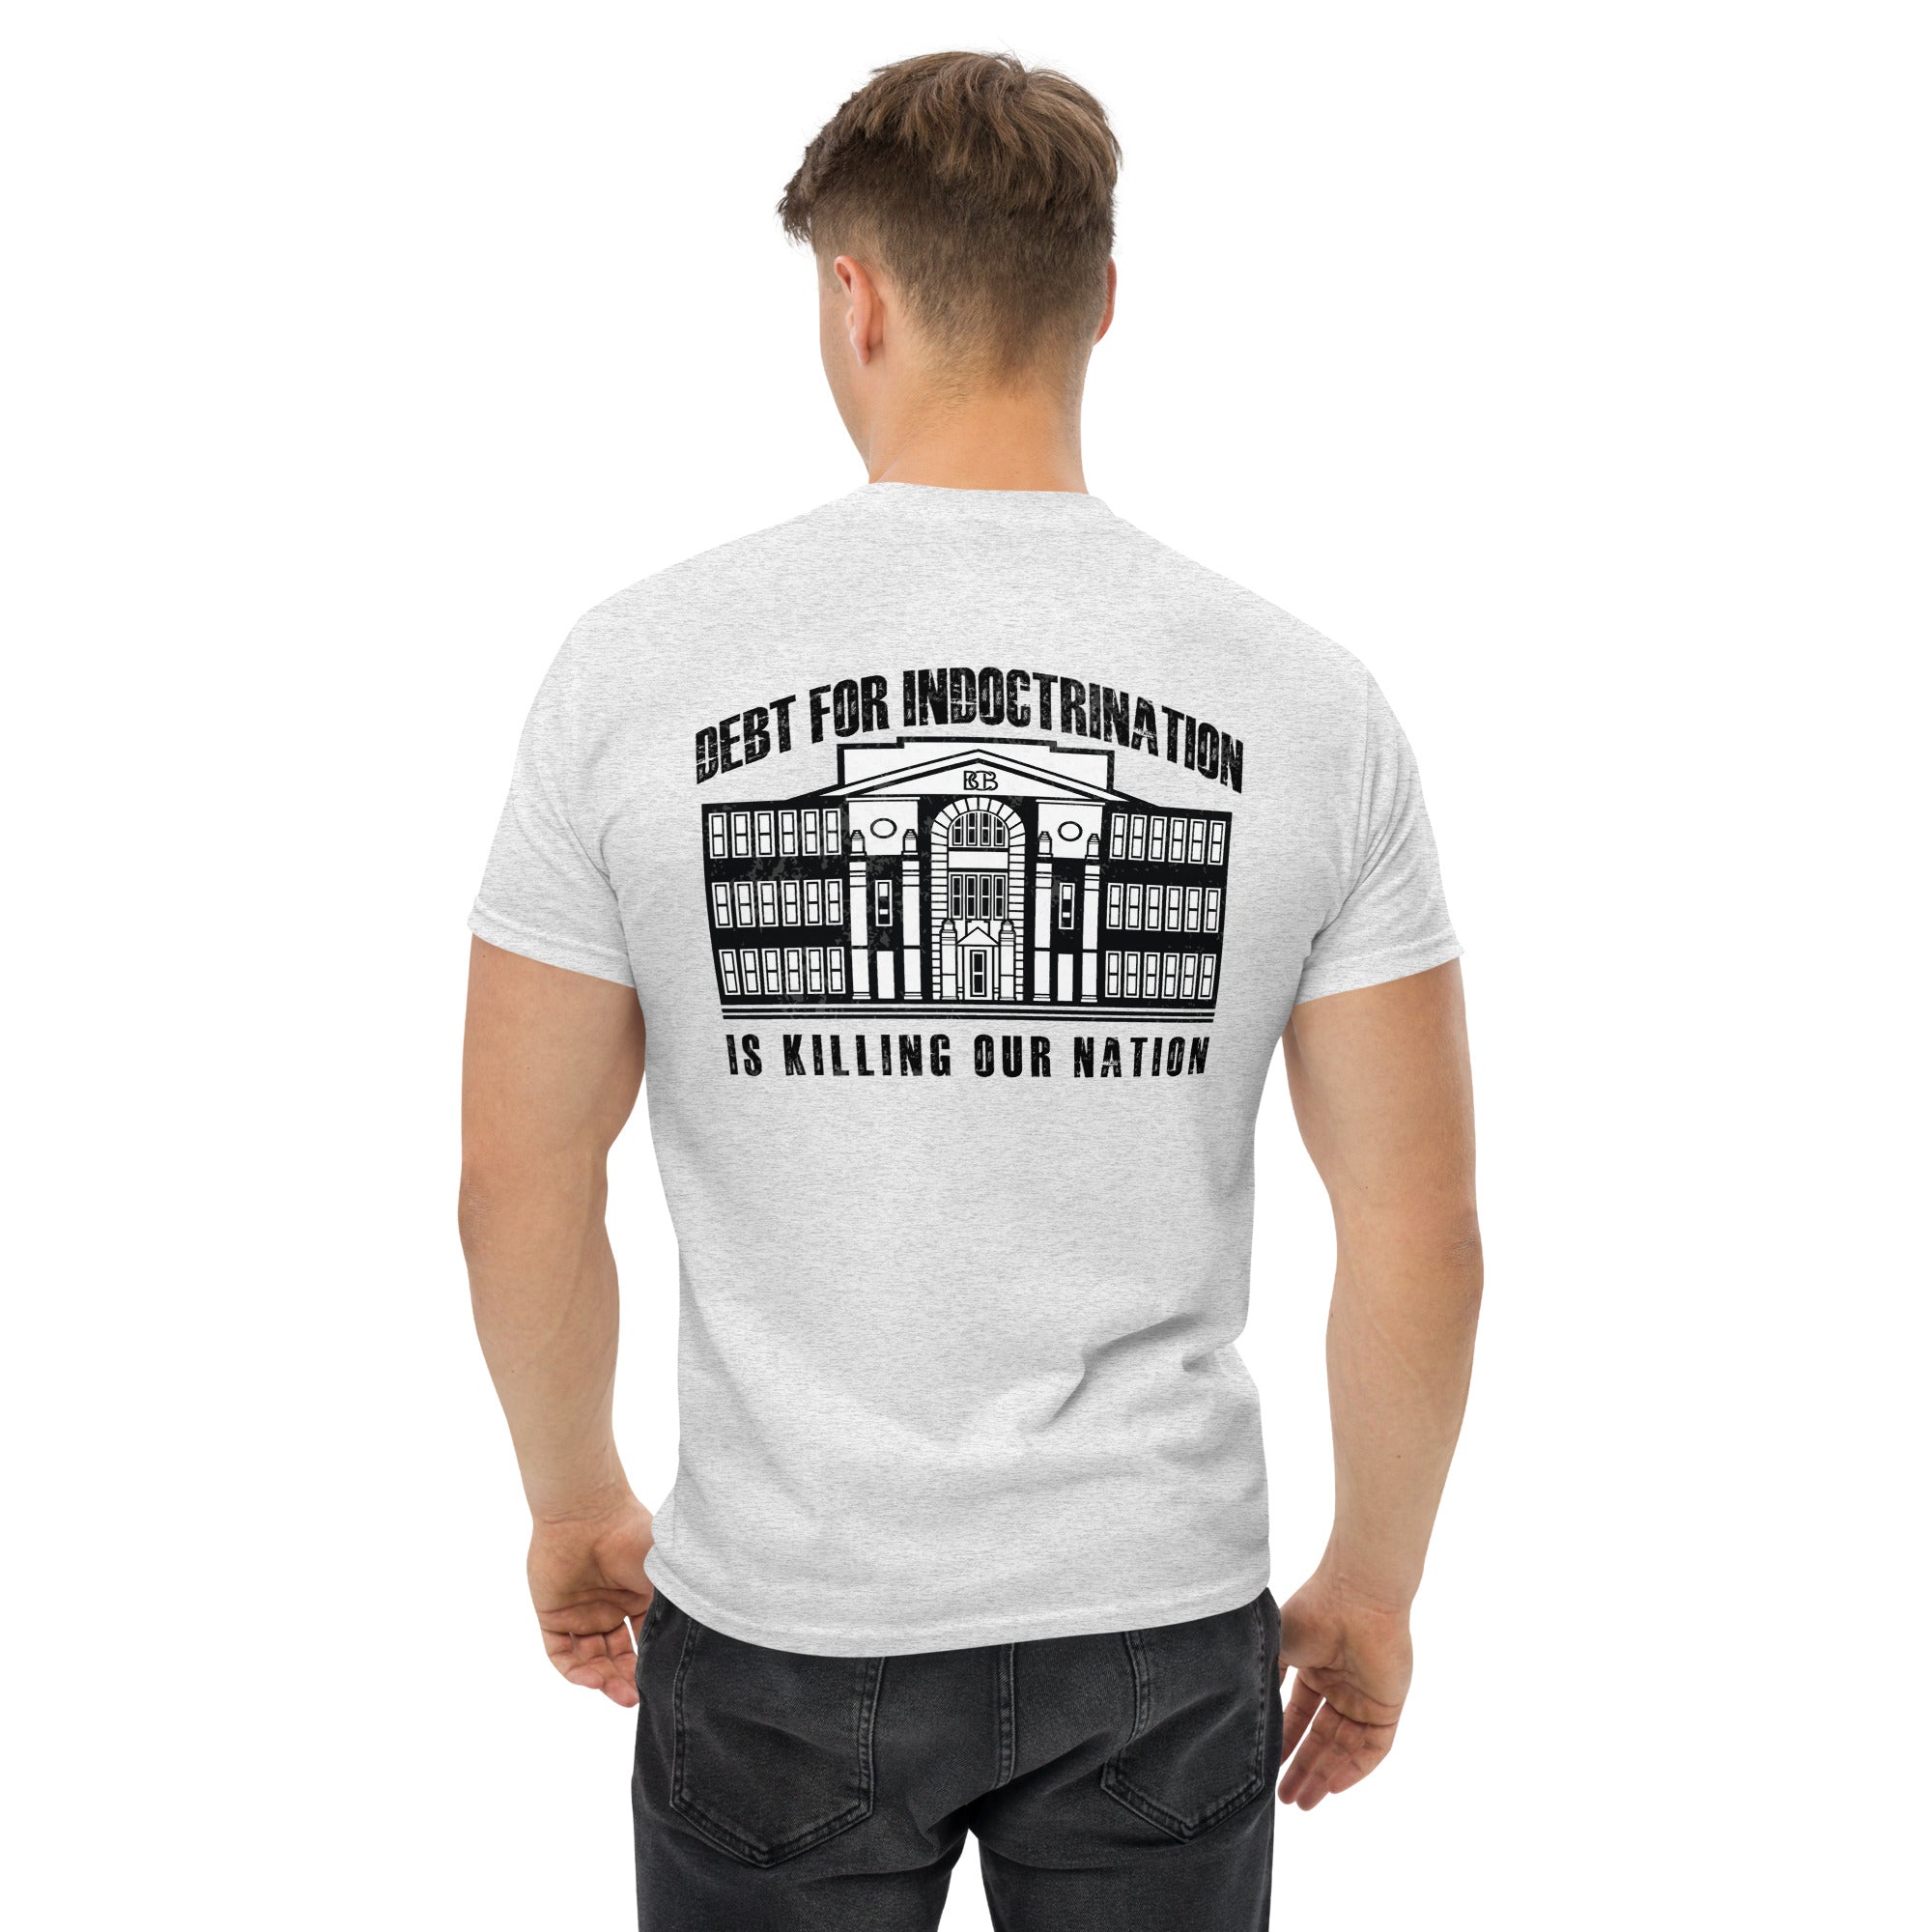 Debt for Indoctrination is killing our nation  I  Men's classic tee